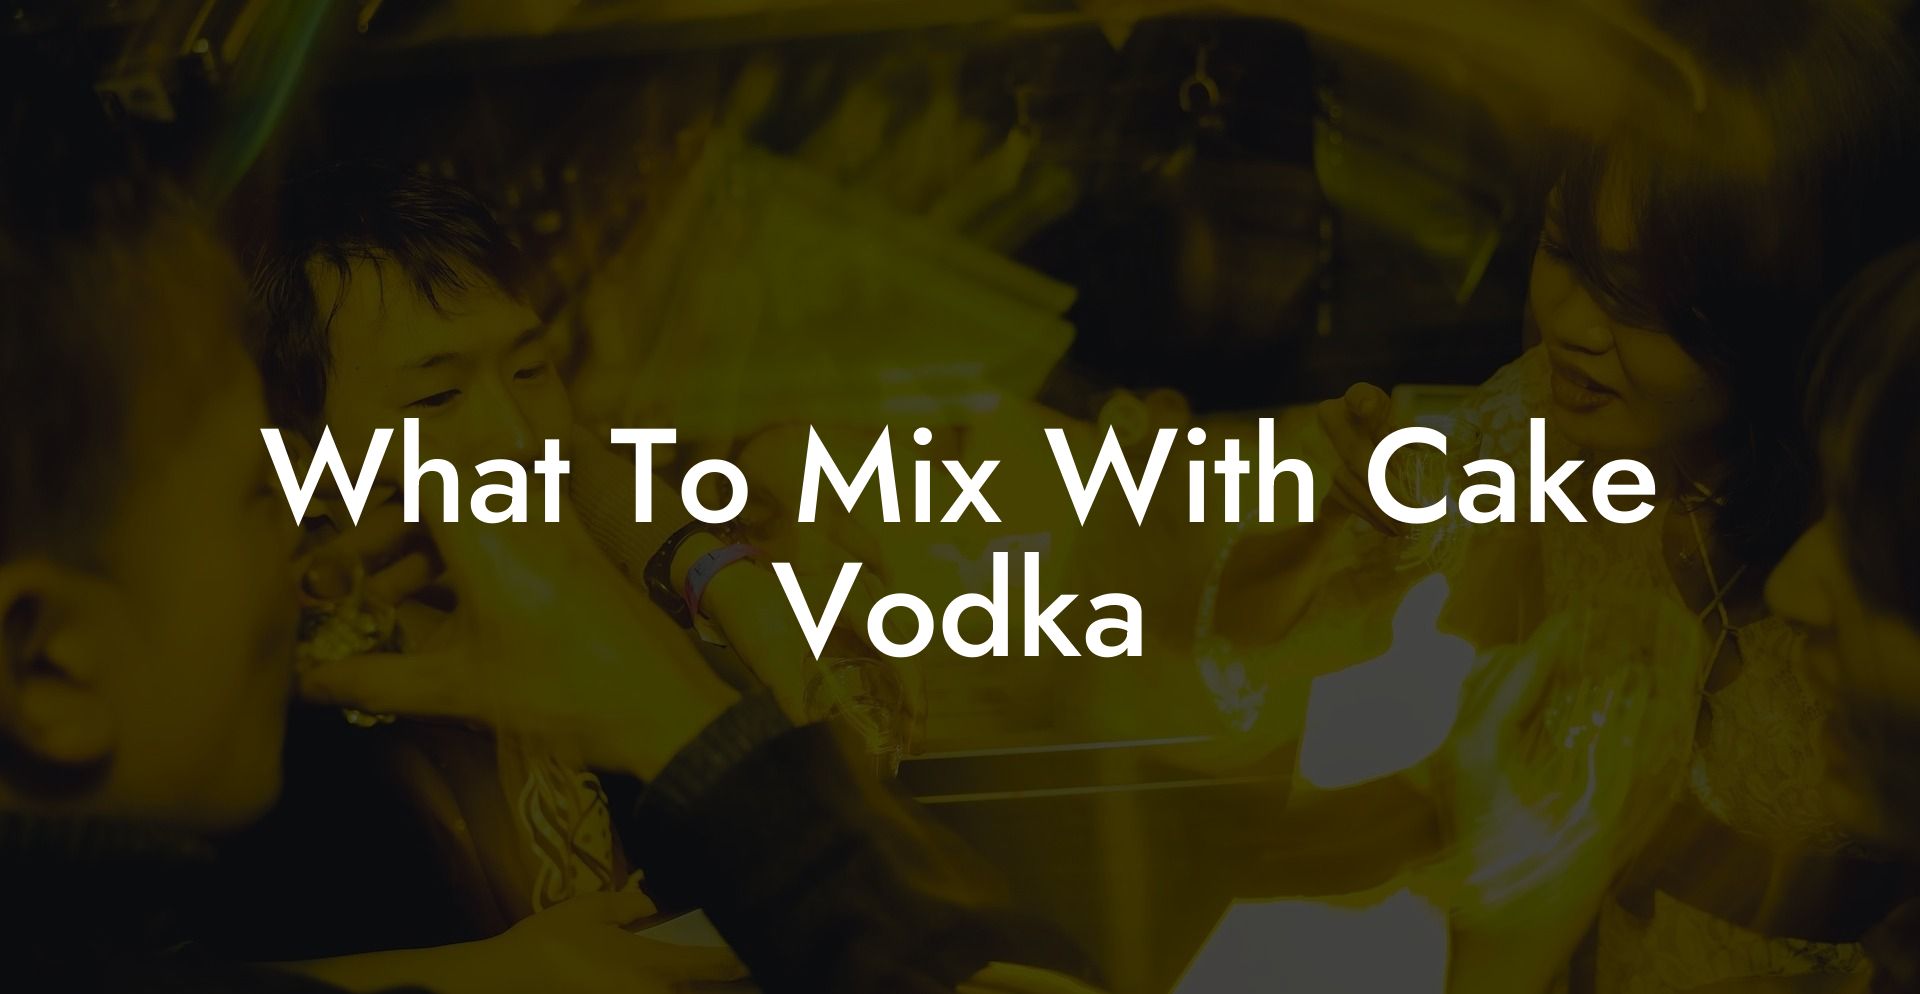 What To Mix With Cake Vodka